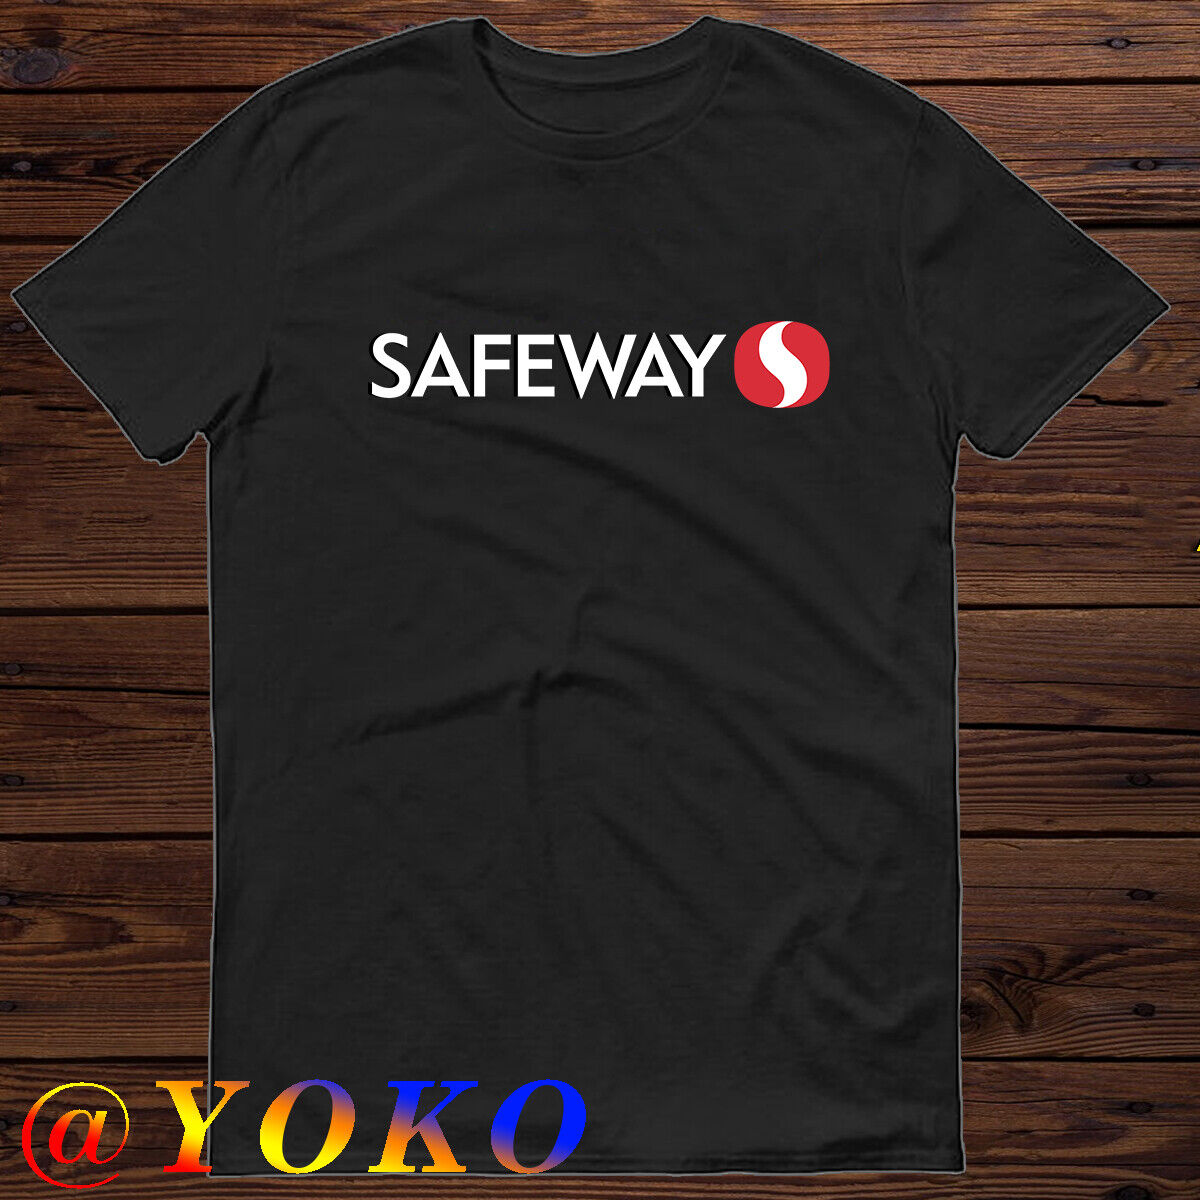 Safeway Market Grocery Logo Men\'s T-Shirt USA Size S to 5XL Many Color